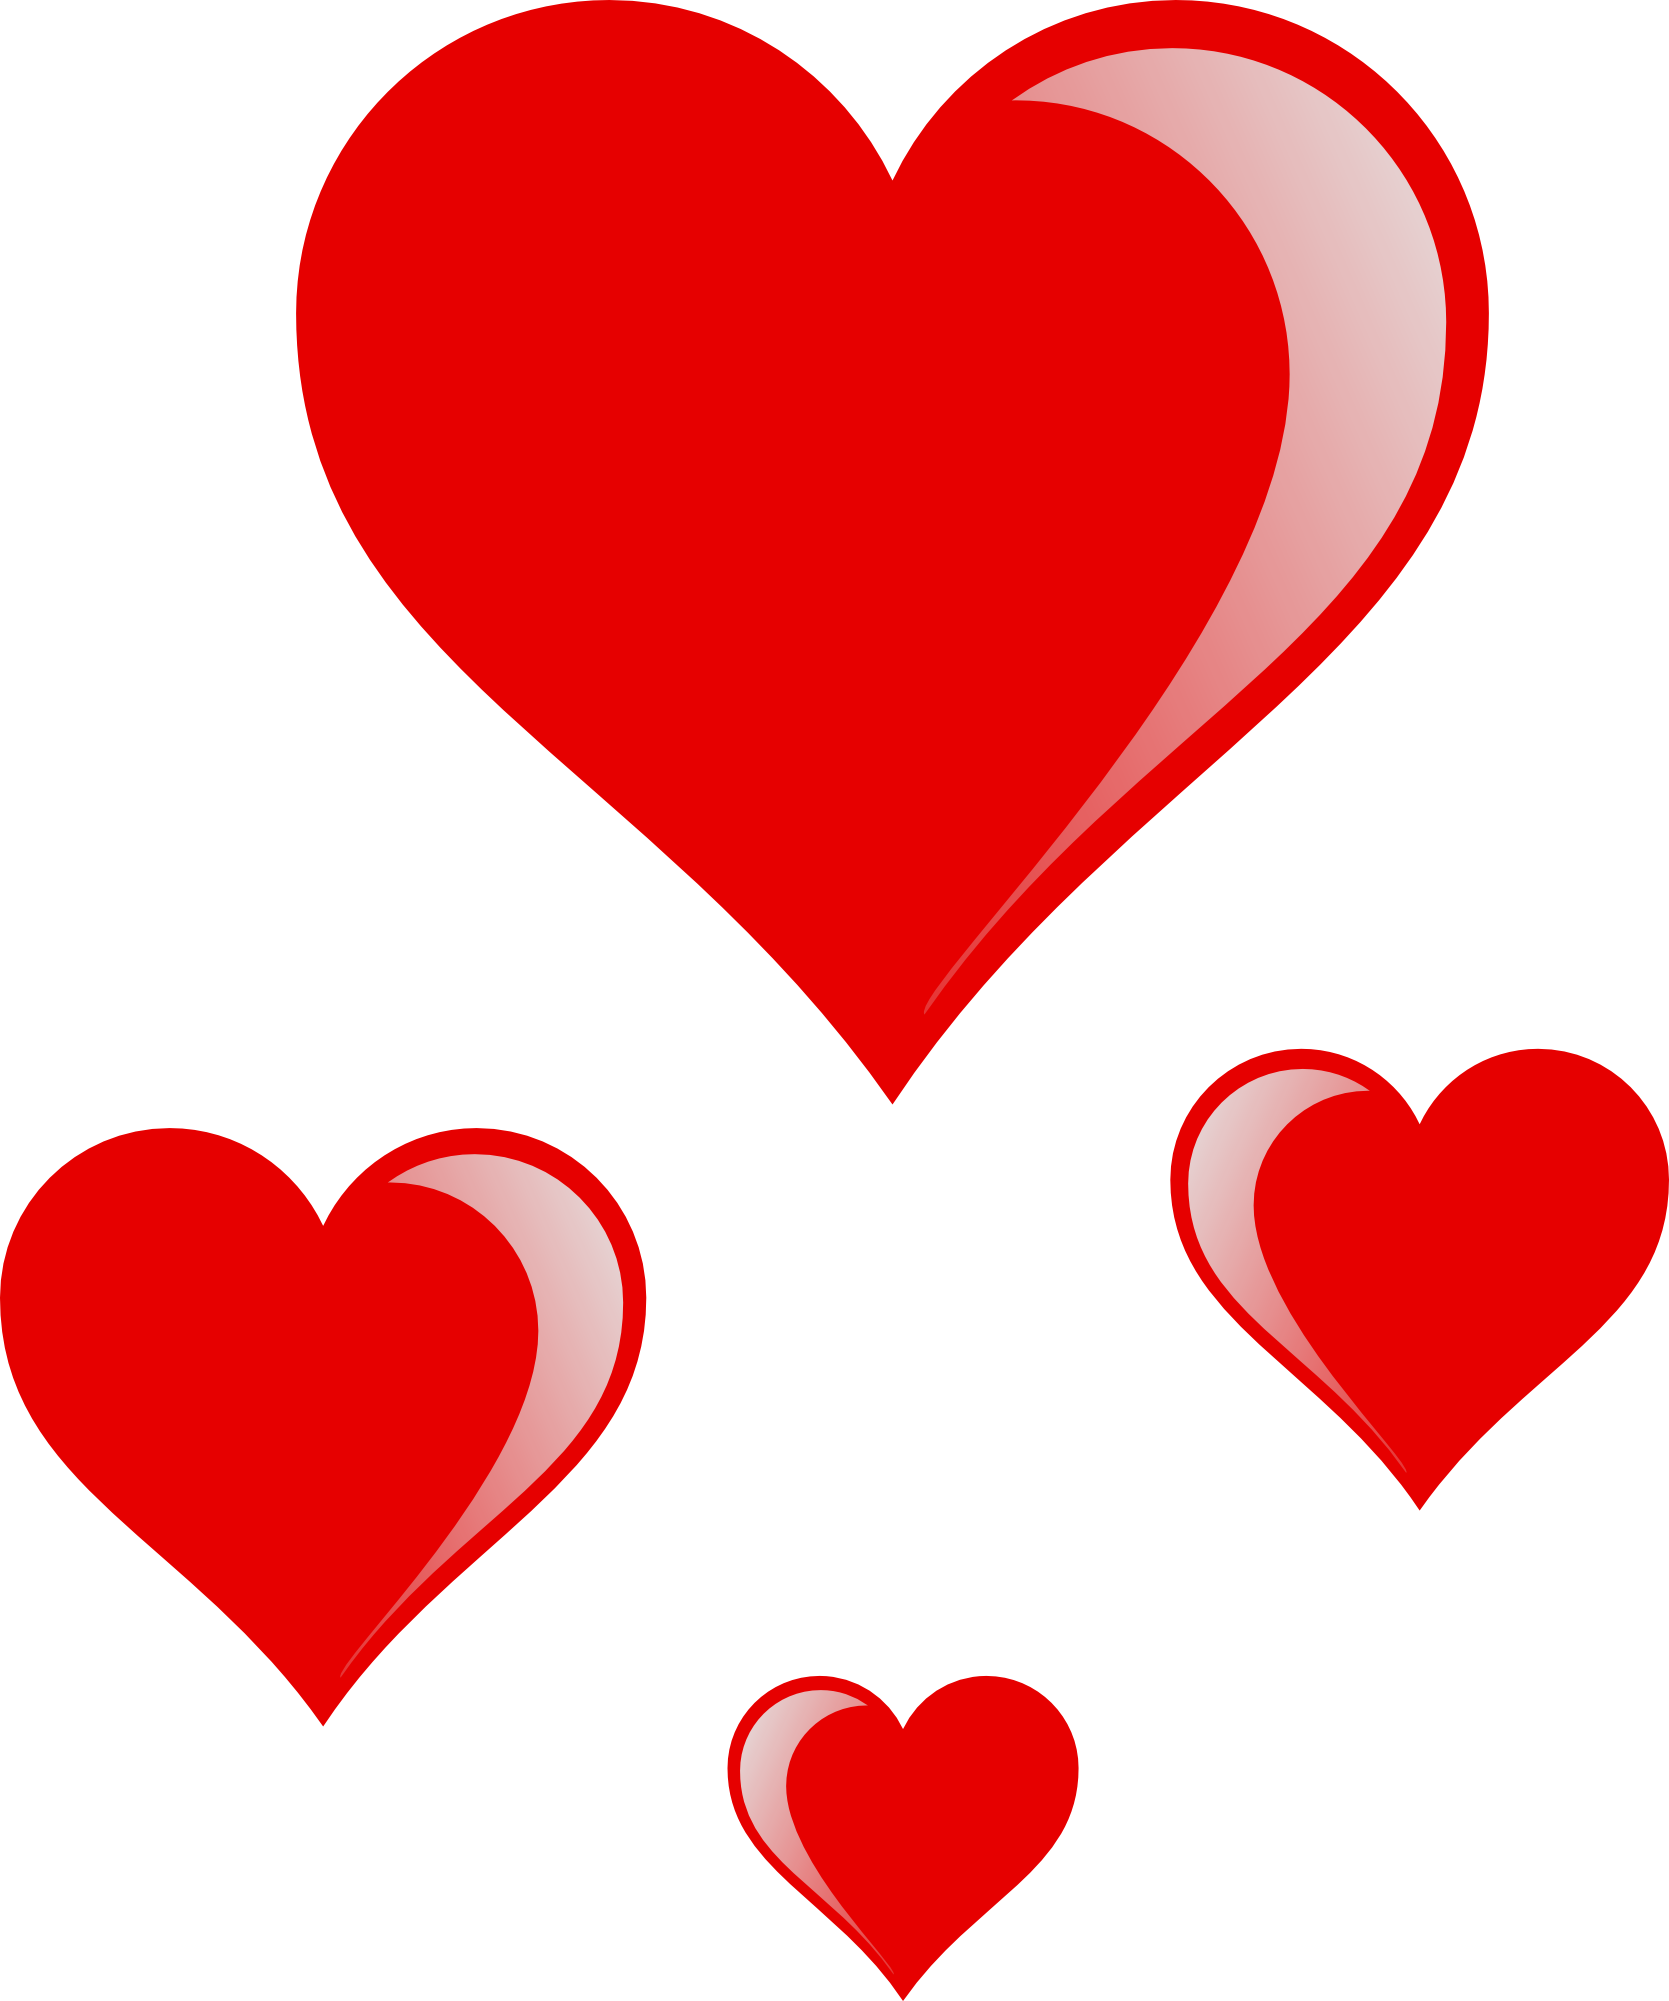 valentine heart clipart images - photo #18